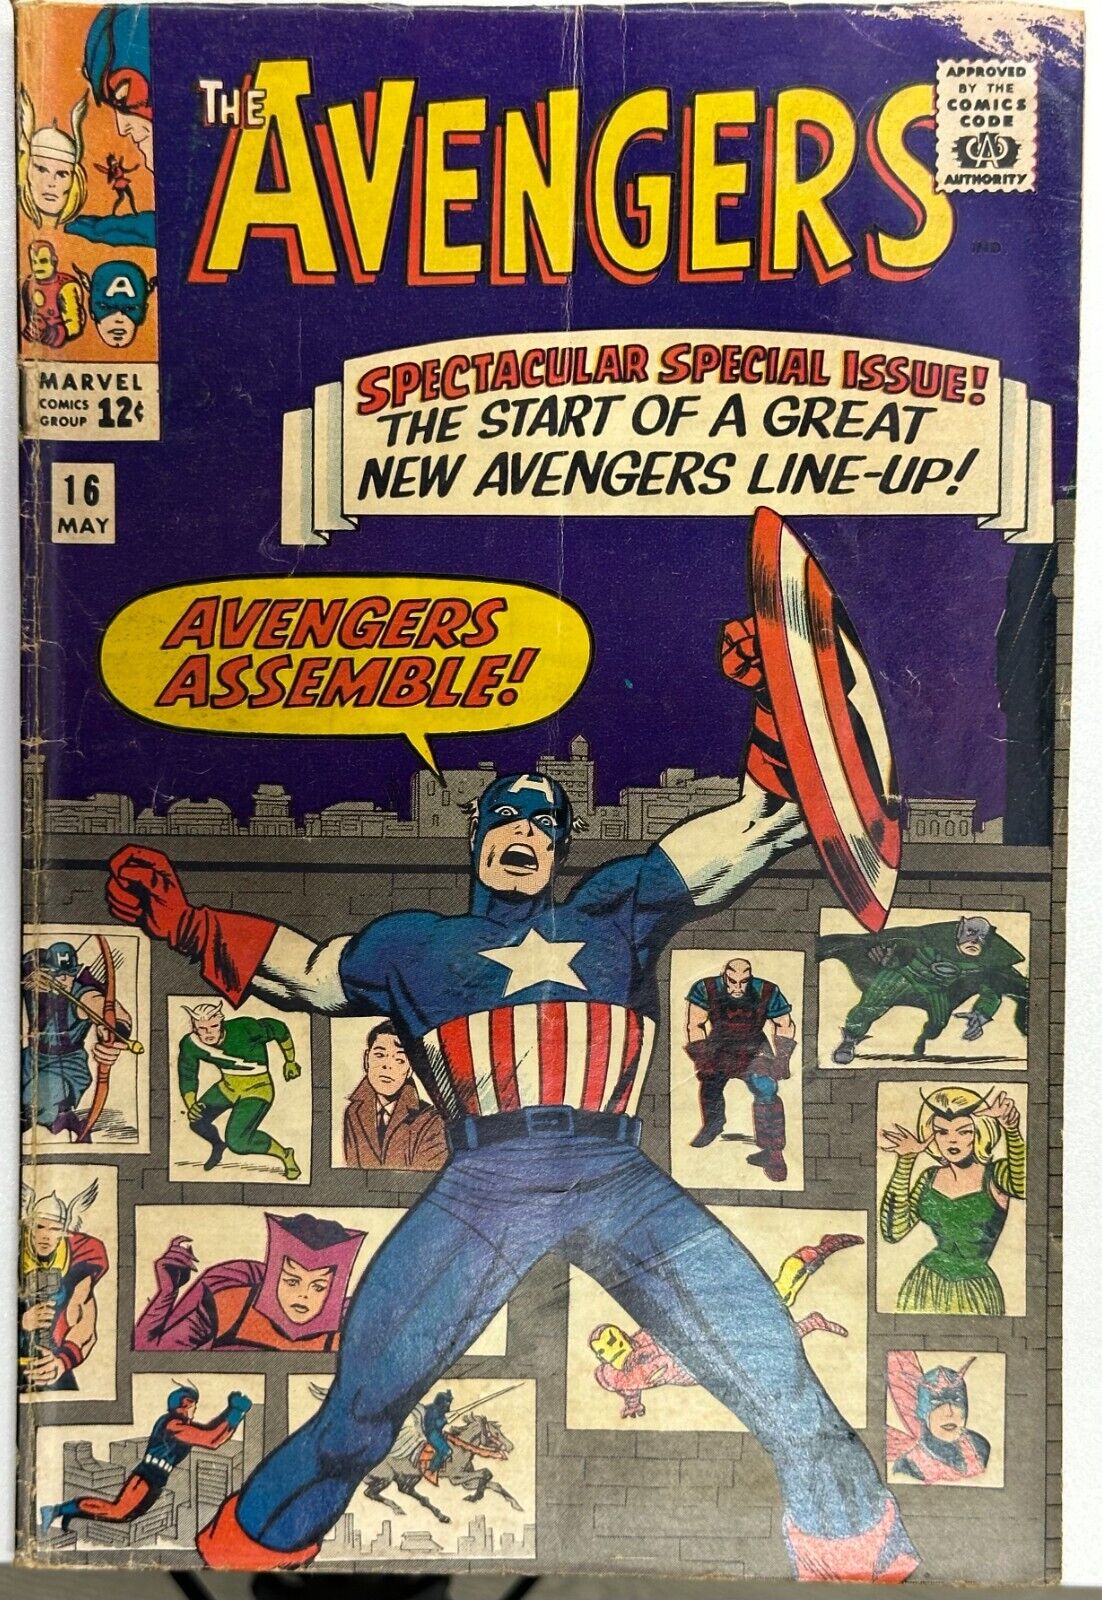 Avengers #16,  Hawkeye, Scarlet Witch & Quicksilver join Avengers, Marvel 1965